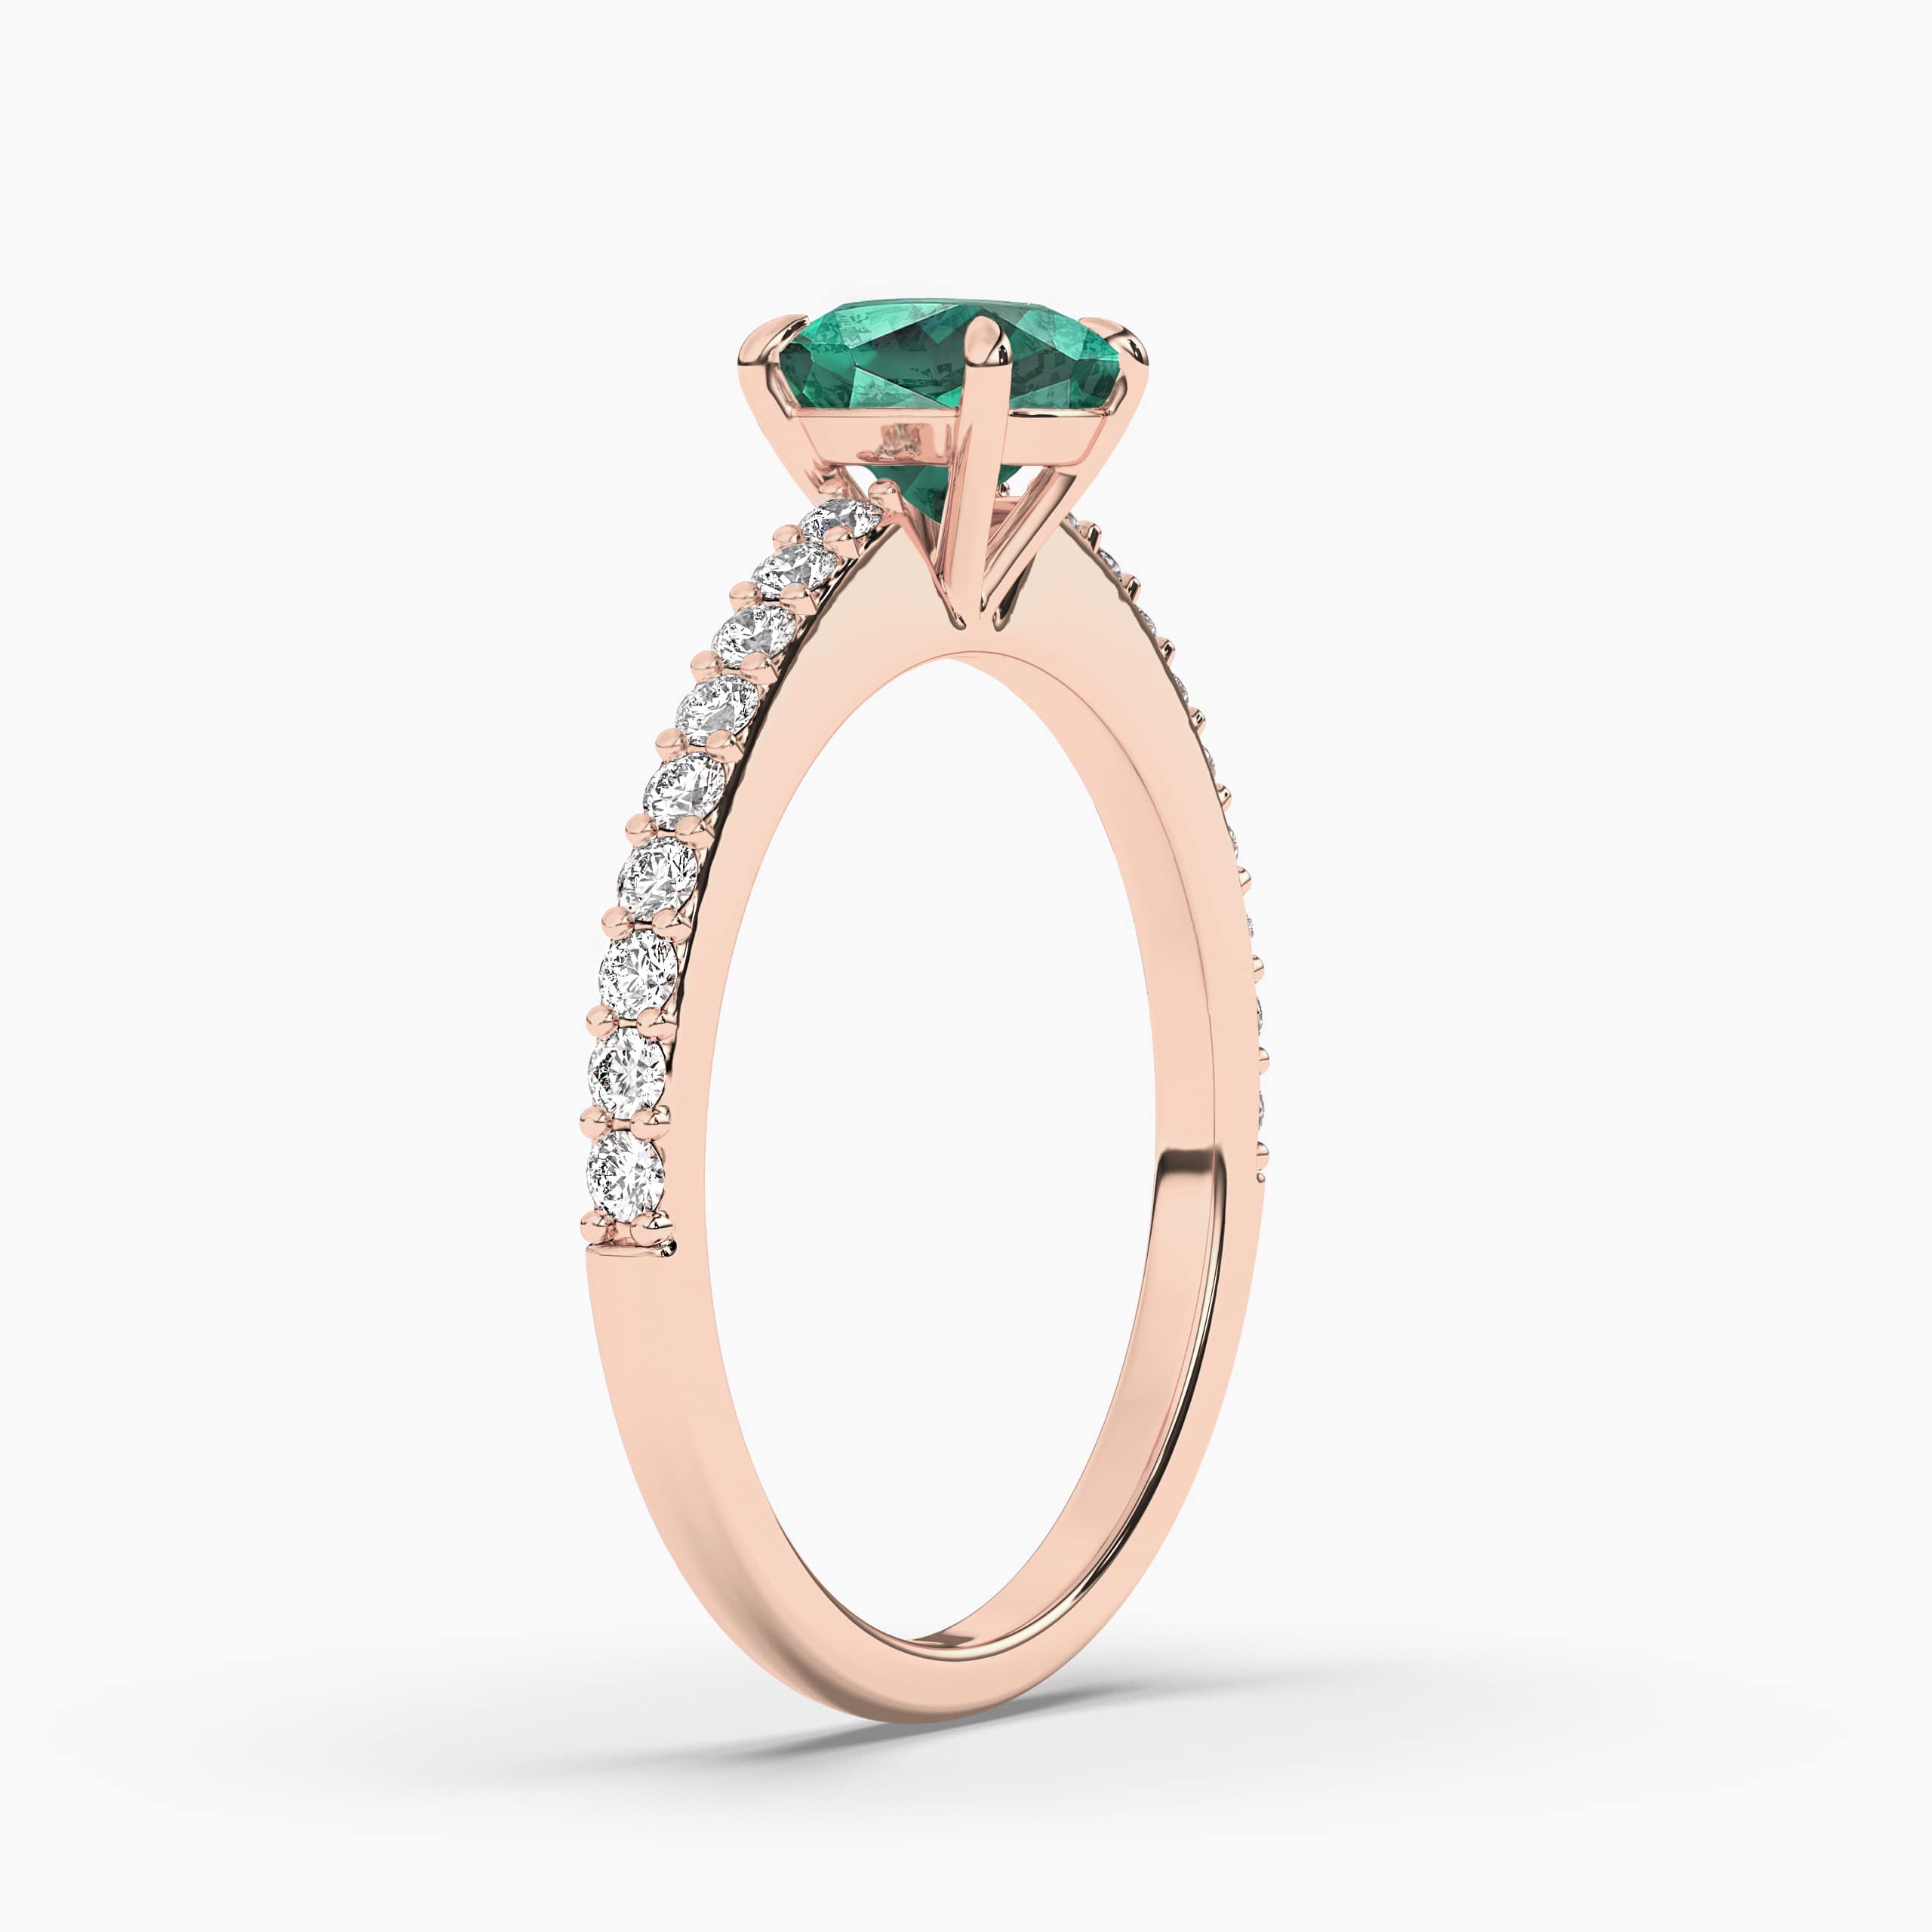 CUSHION CUT EMERALD AND DIAMONDS ROSE GOLD RING FOR WOMAN'S